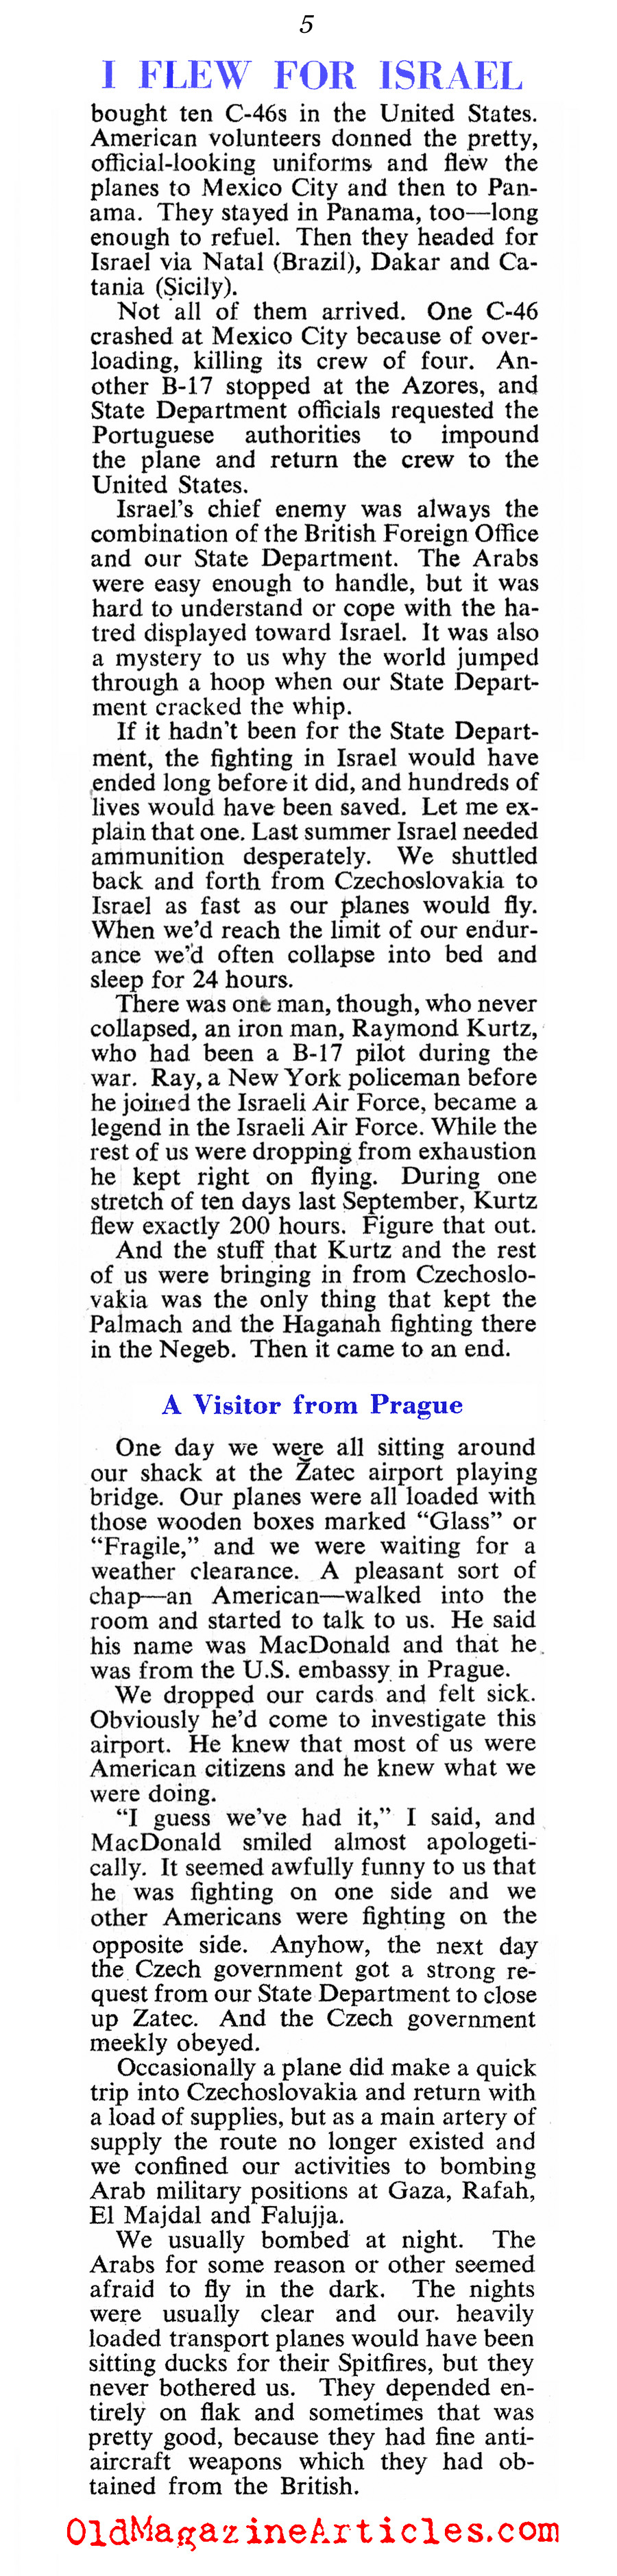 ''I Flew for Israel'' (Collier's Magazine, 1949)